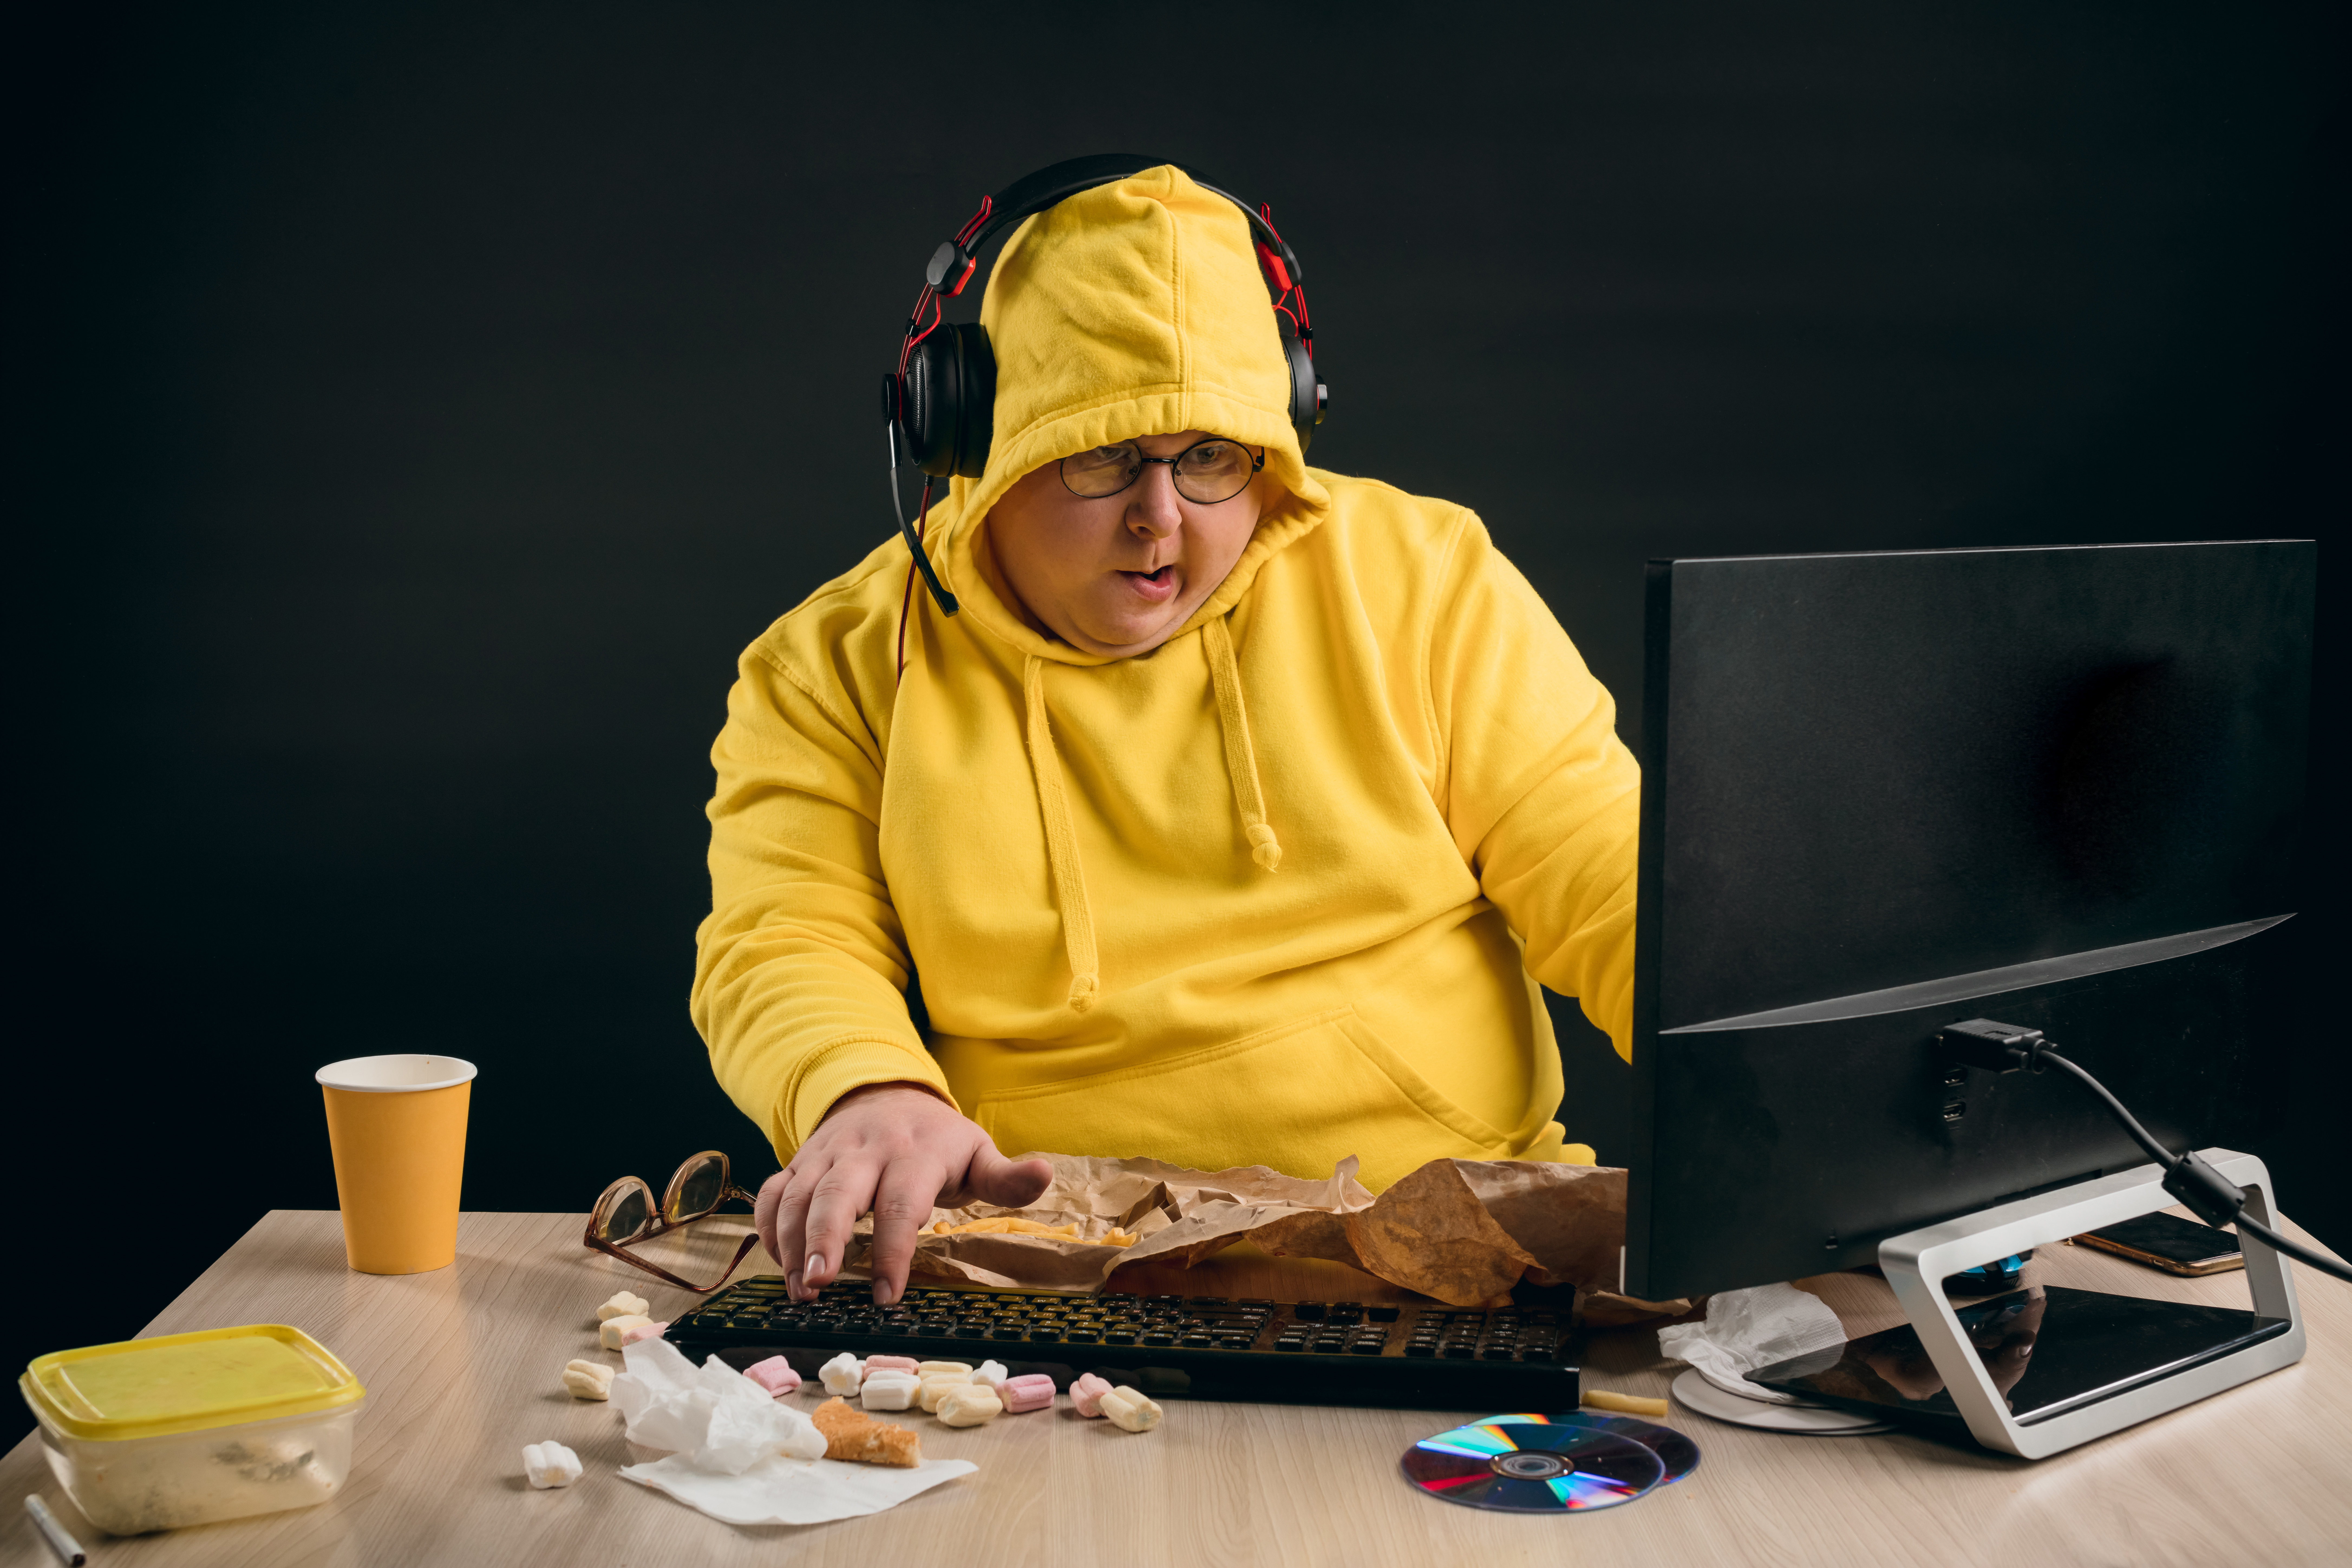 A man in a hoodie sitting behind a messy desk | Source: Shutterstock